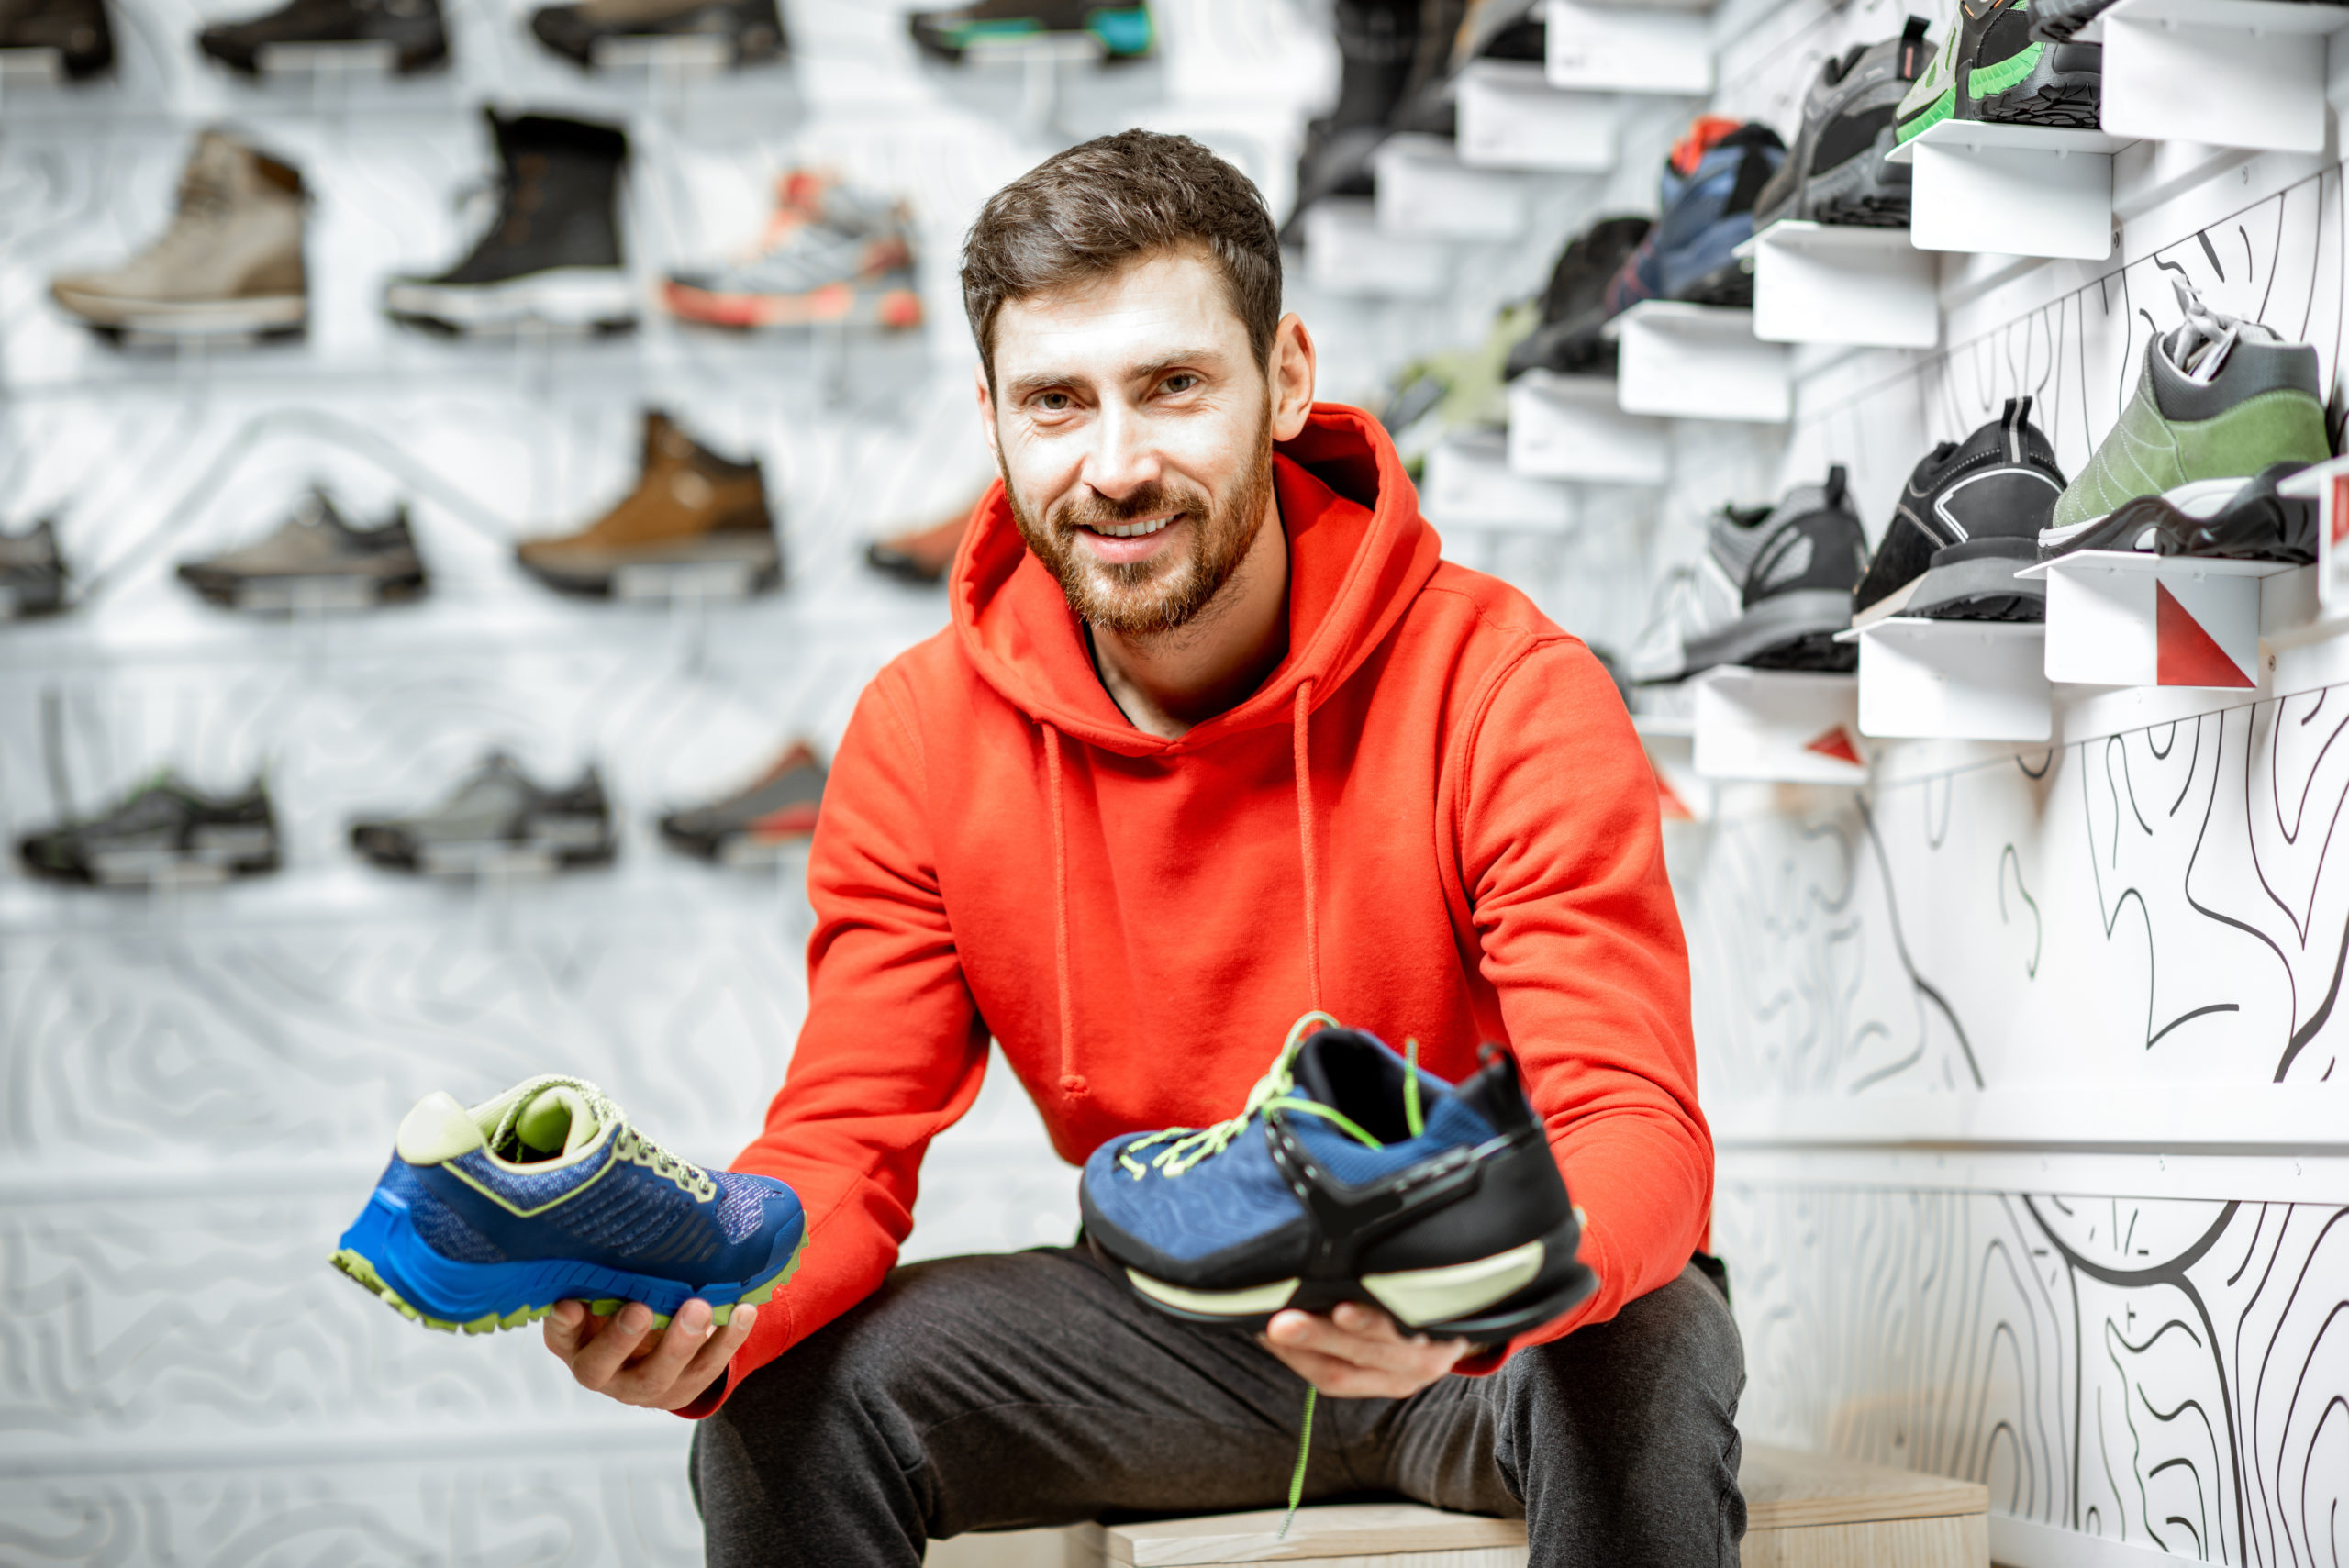 A man shopping for running shoes